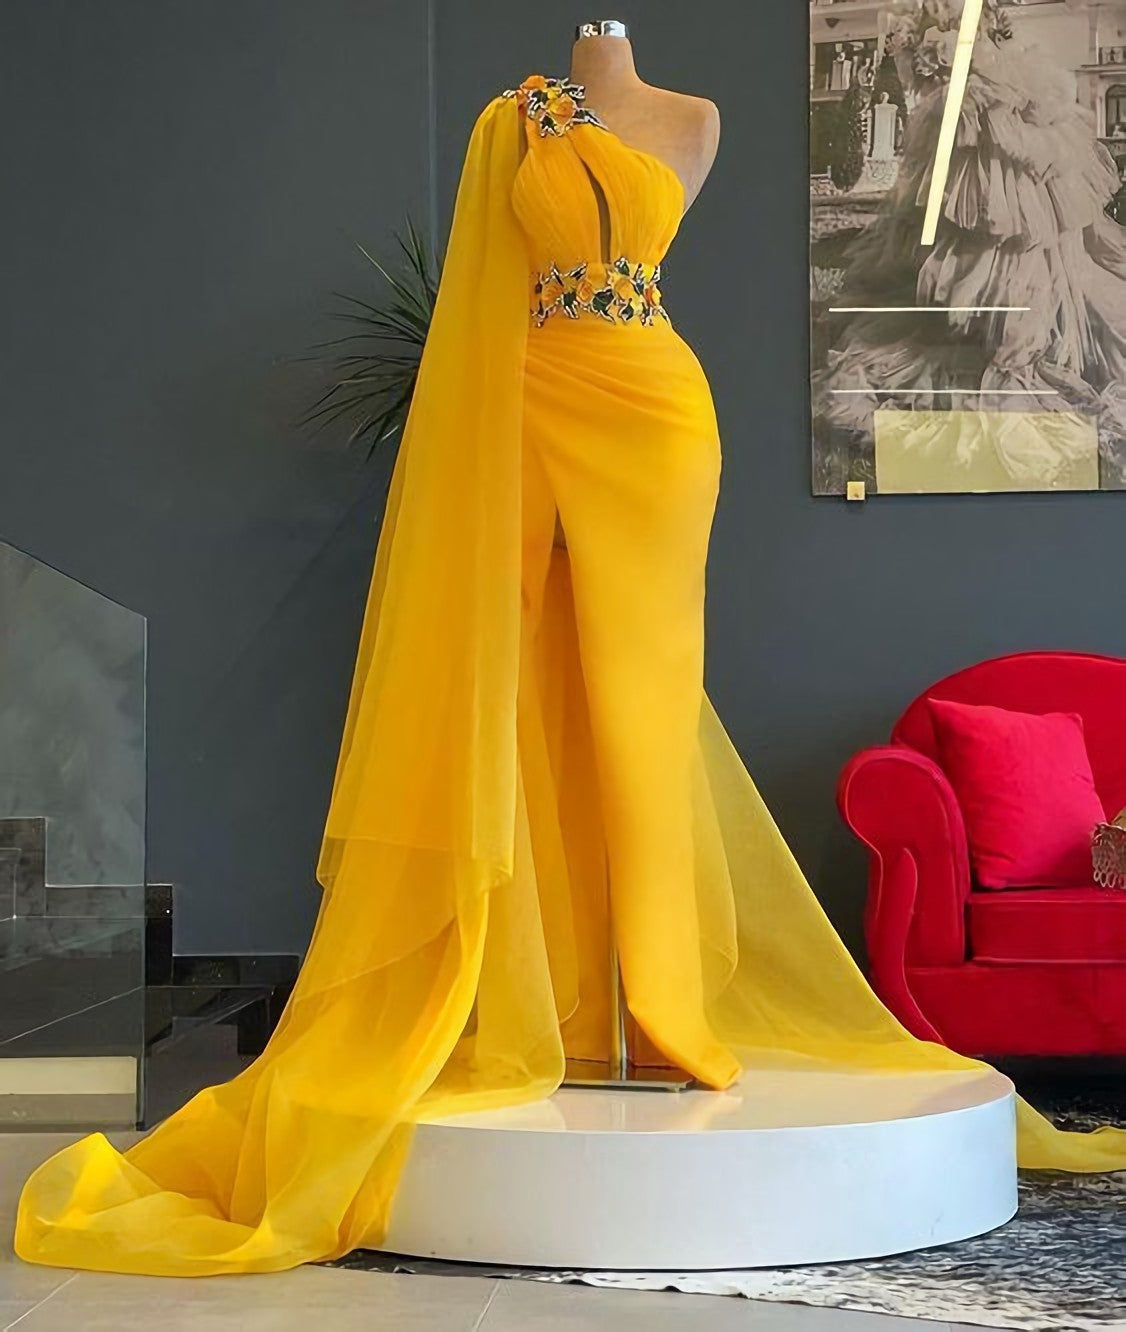 Yellow Long Corset Prom Dresses outfit, Prom Dress Shopping Near Me